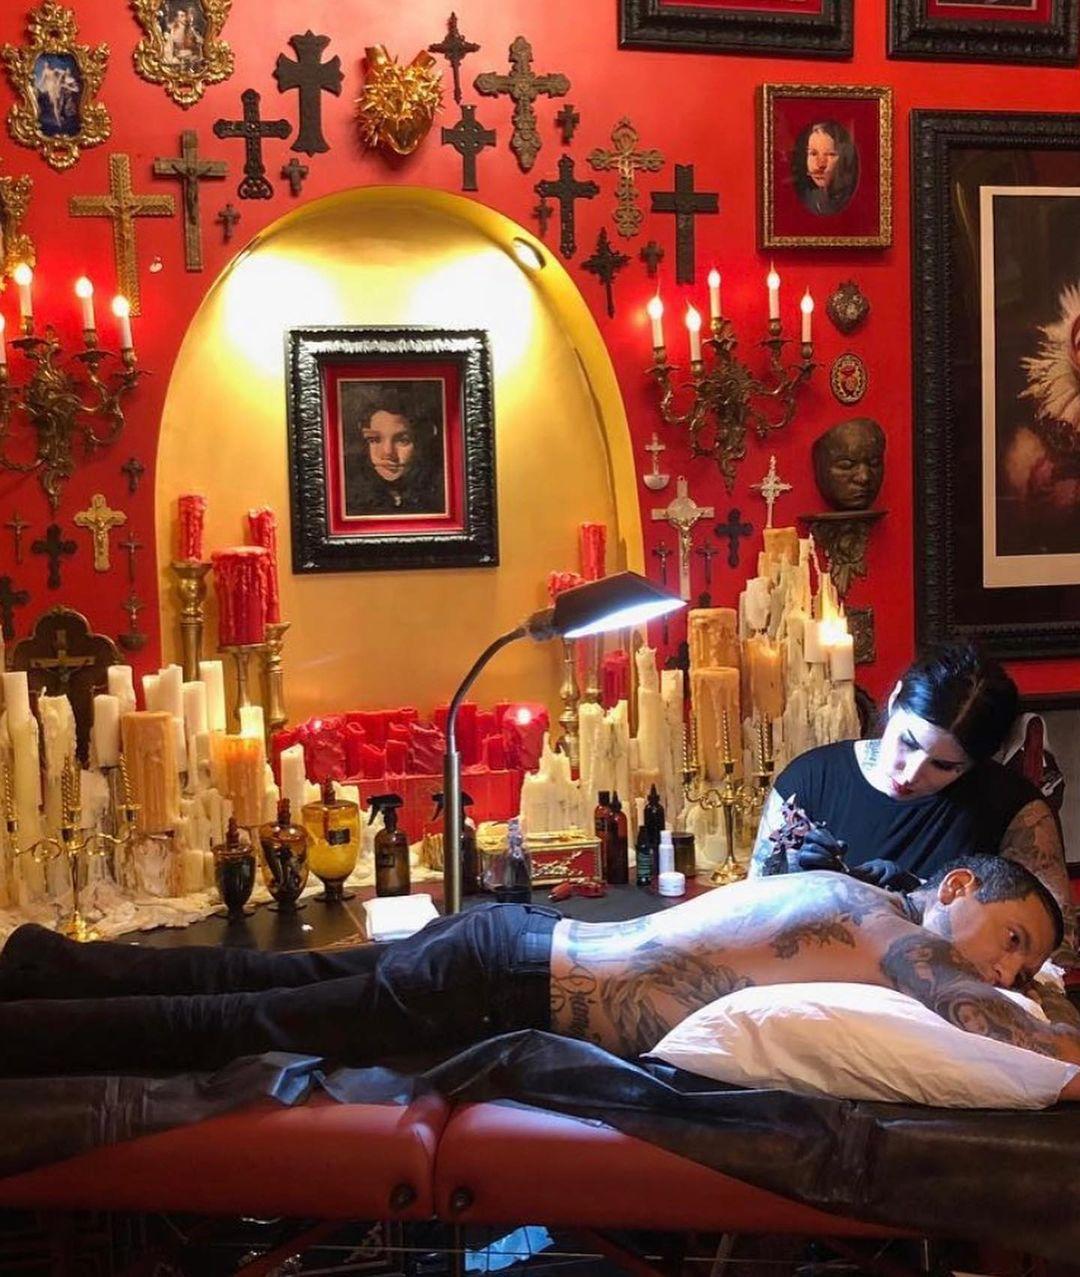 Kat Von D Accused Of Illegally Running Tattoo Shop During COVID-19 Lockdown